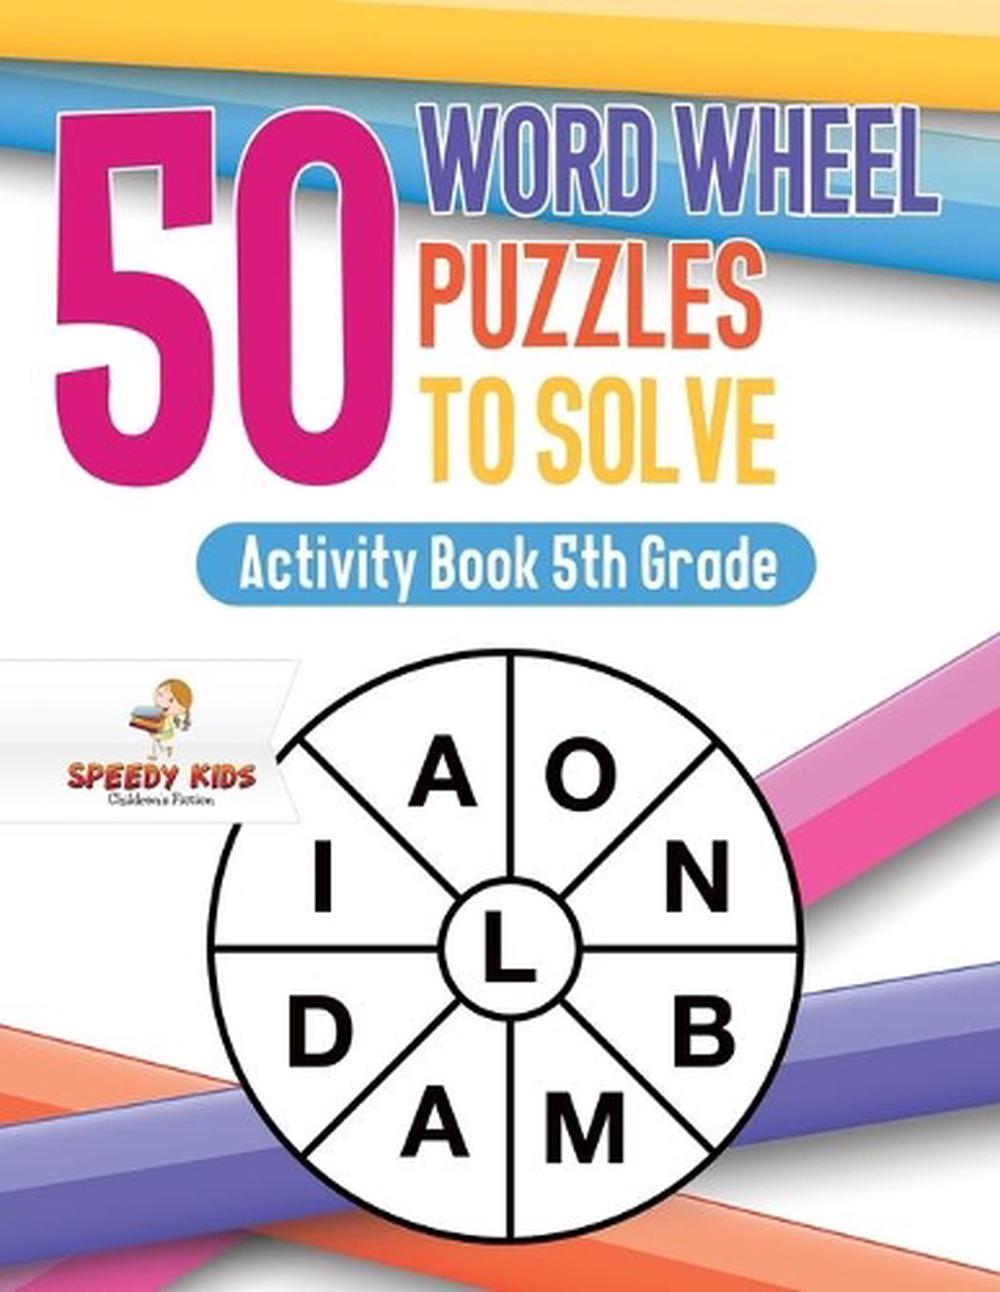 50-word-wheel-puzzles-to-solve-activity-book-5th-grade-by-speedy-kids